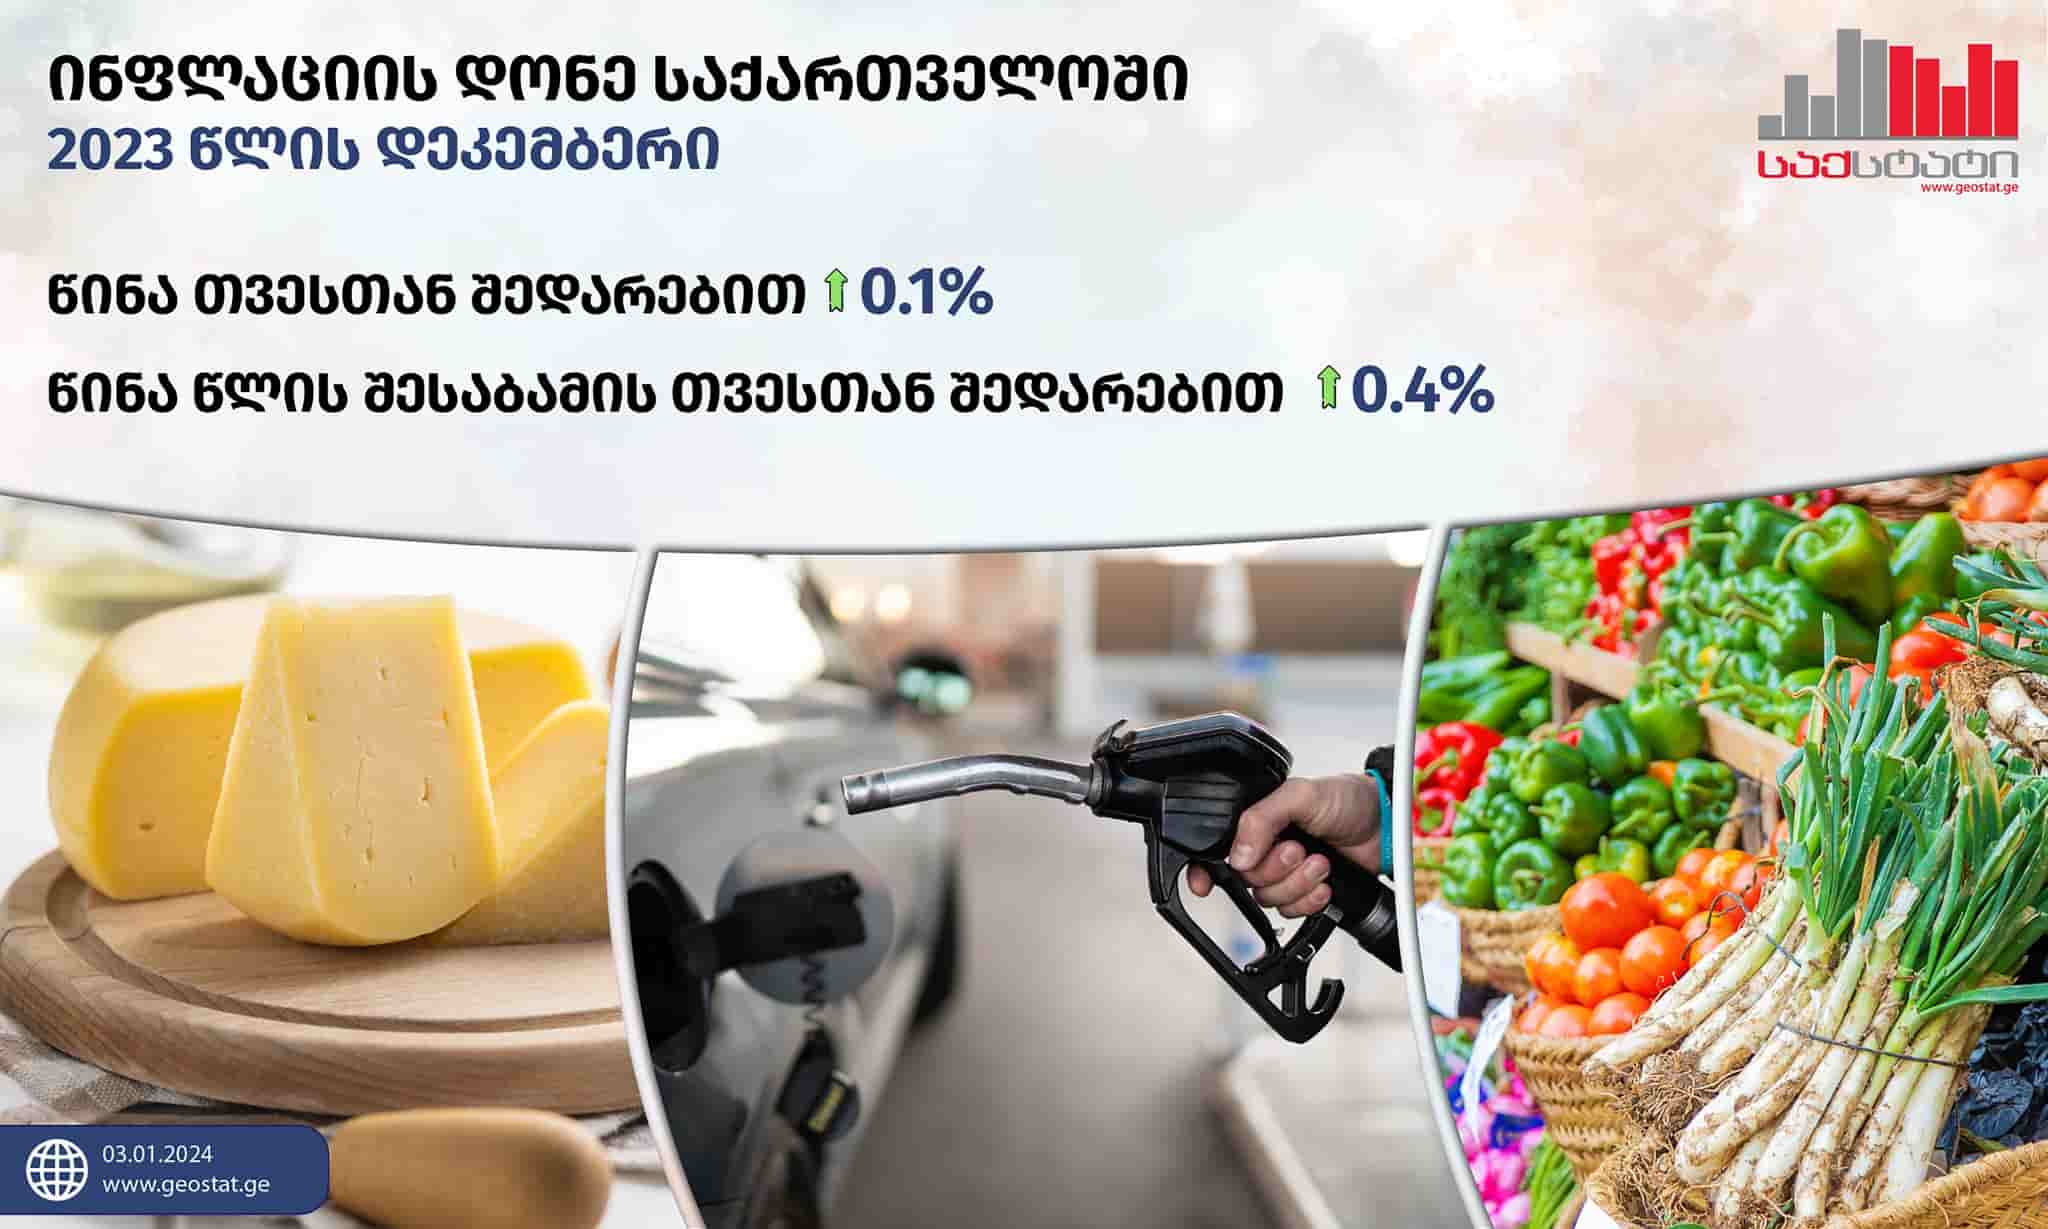 Georgia sees mixed price changes on consumer products